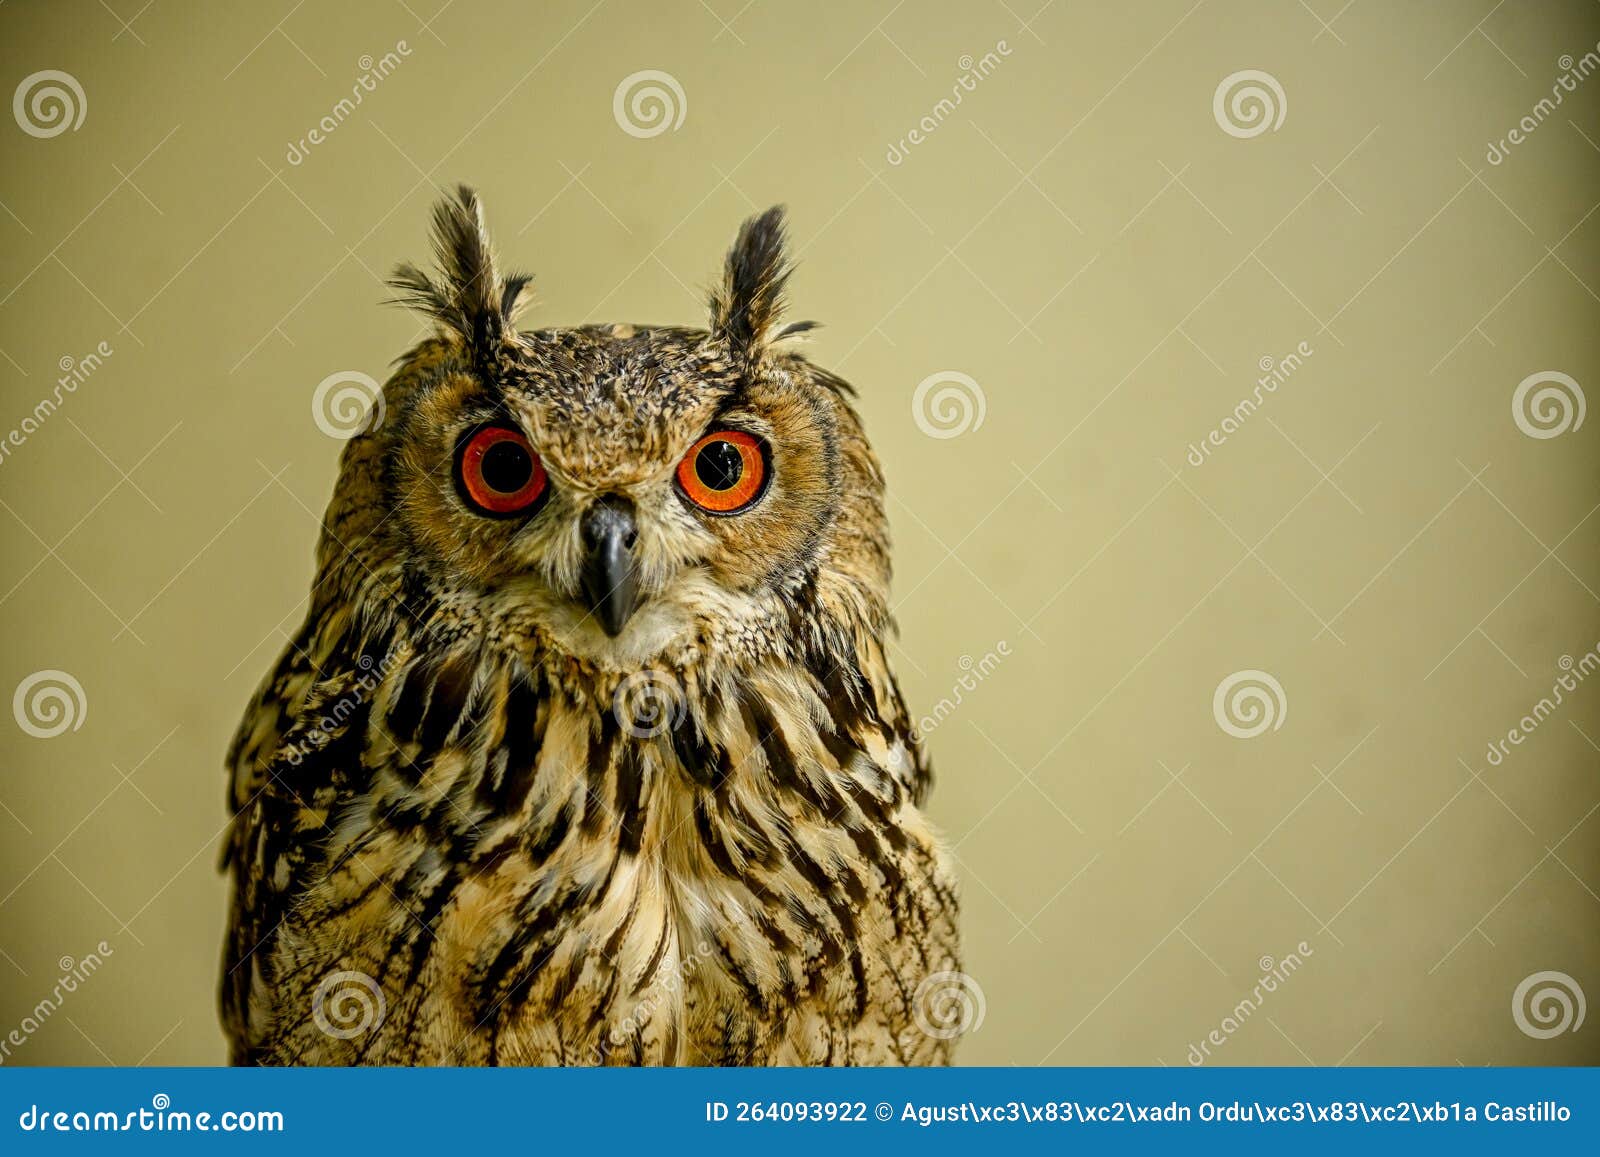 bubo bengalensis or bengal owl or indian eagle owl is a species of strigiform bird in the family strigidae